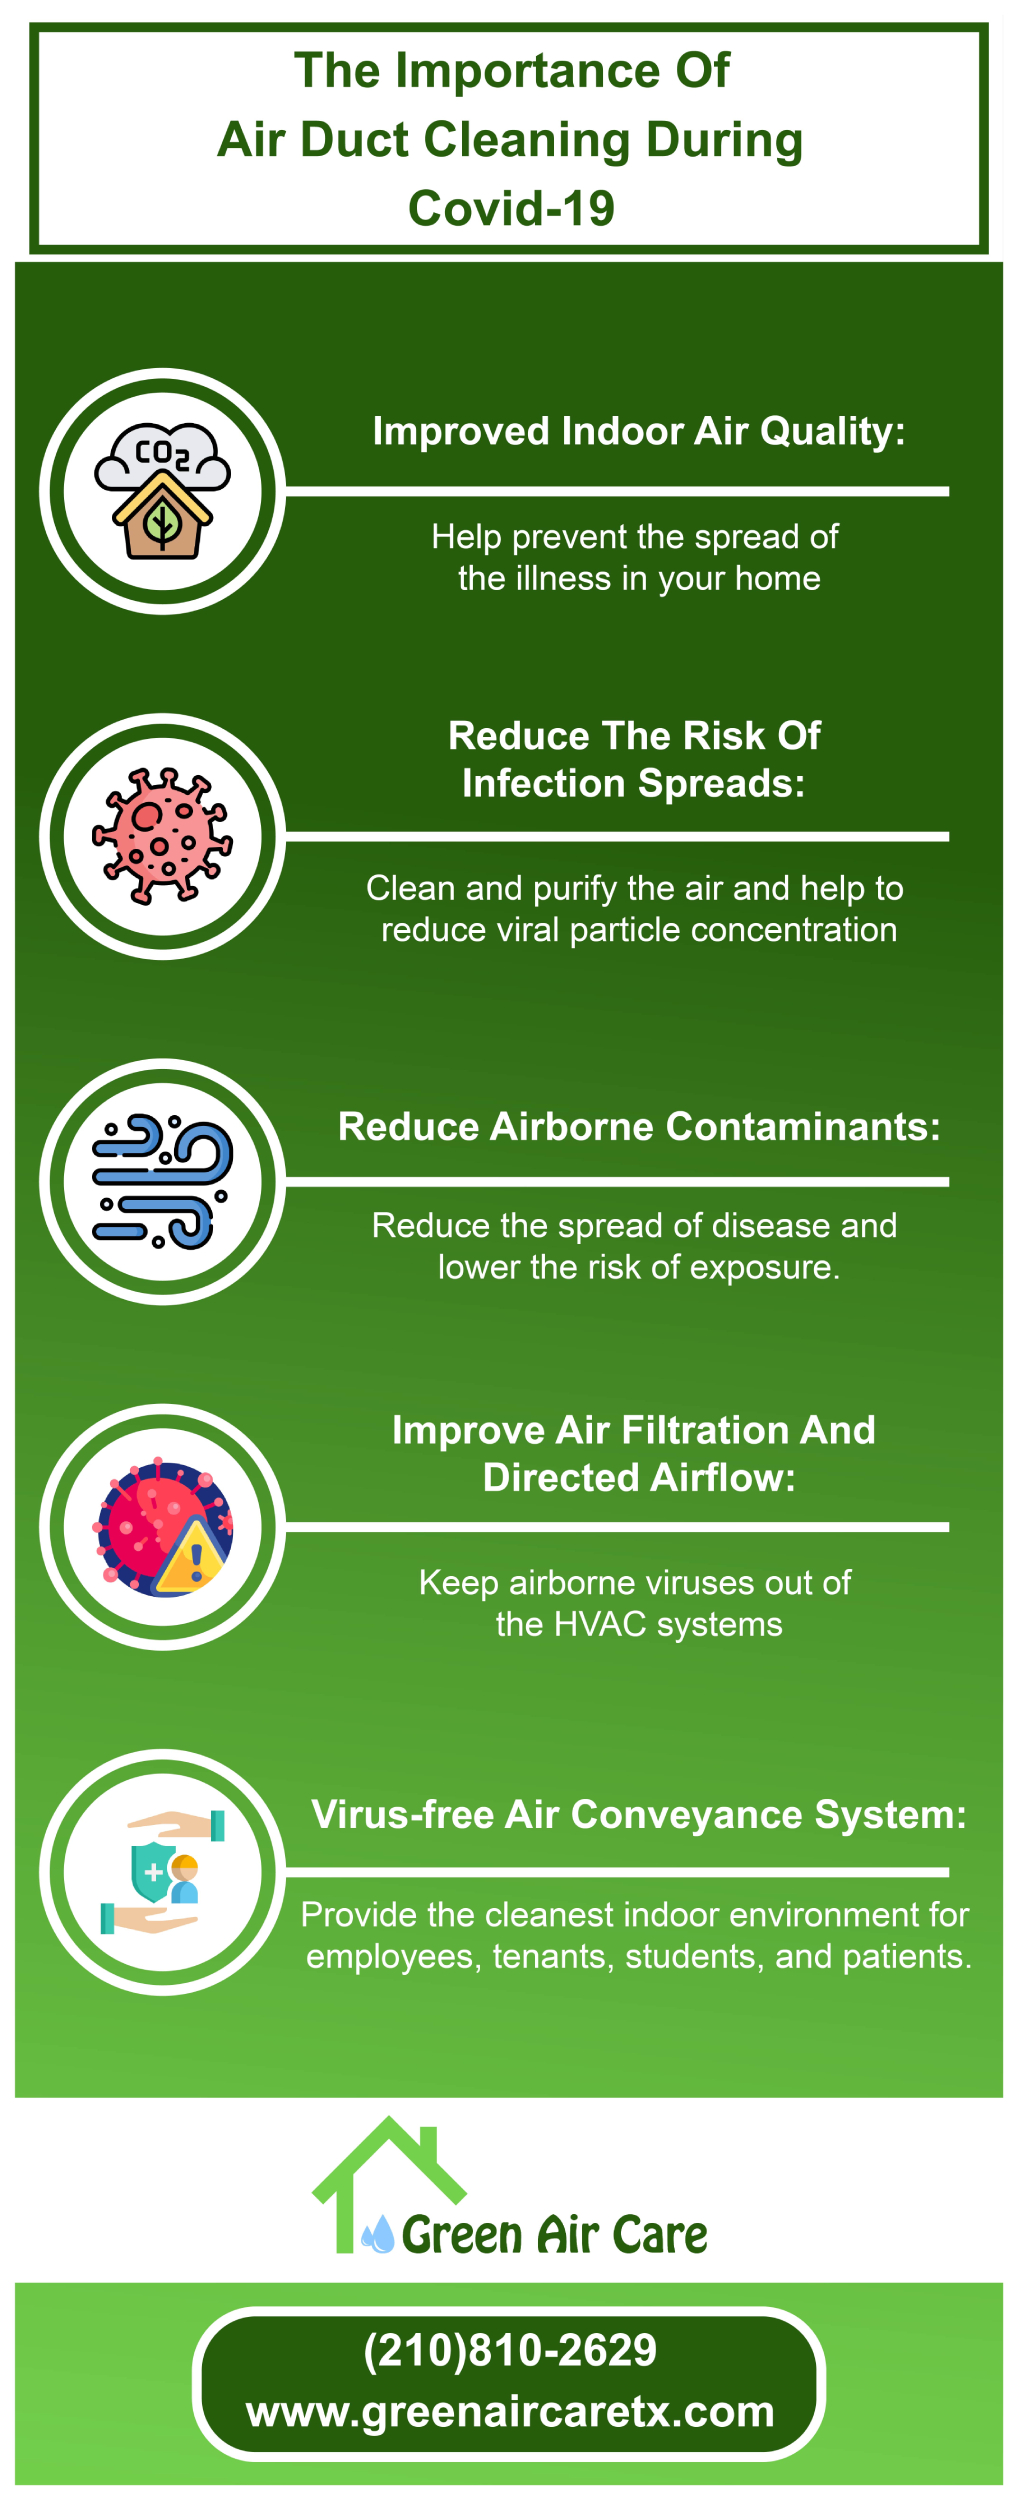 The Importance Of Air Duct Cleaning During Covid-19 [Infographic]